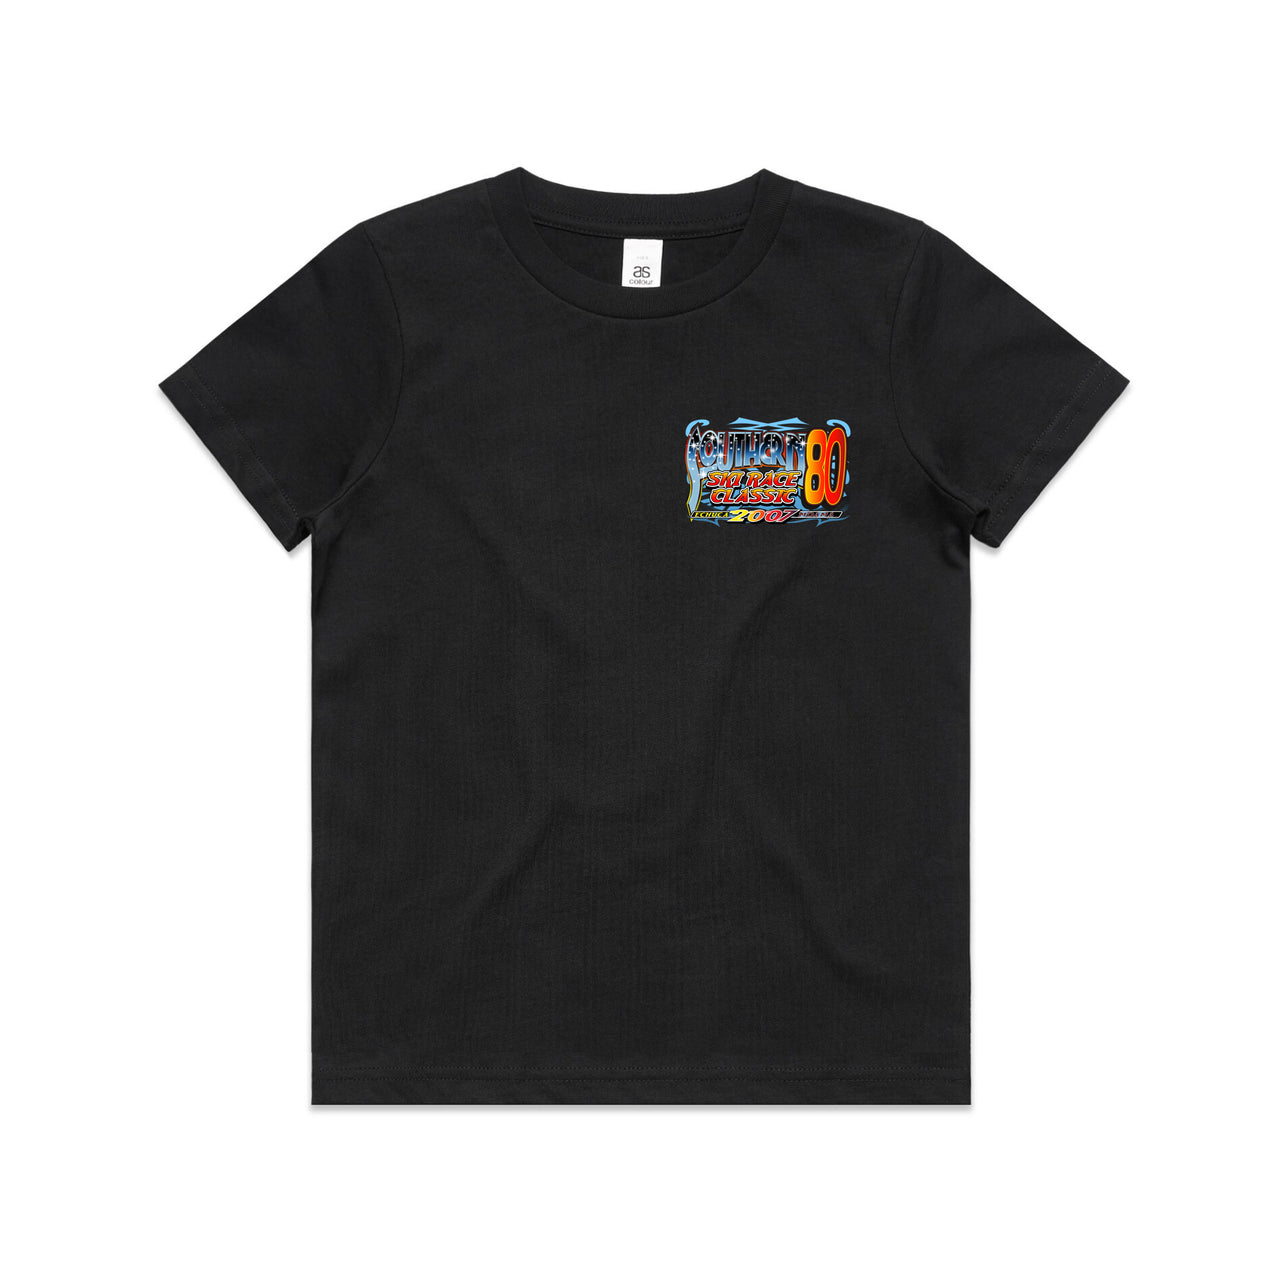 S80 2007 Hellbent Event Youth/Kids Tee